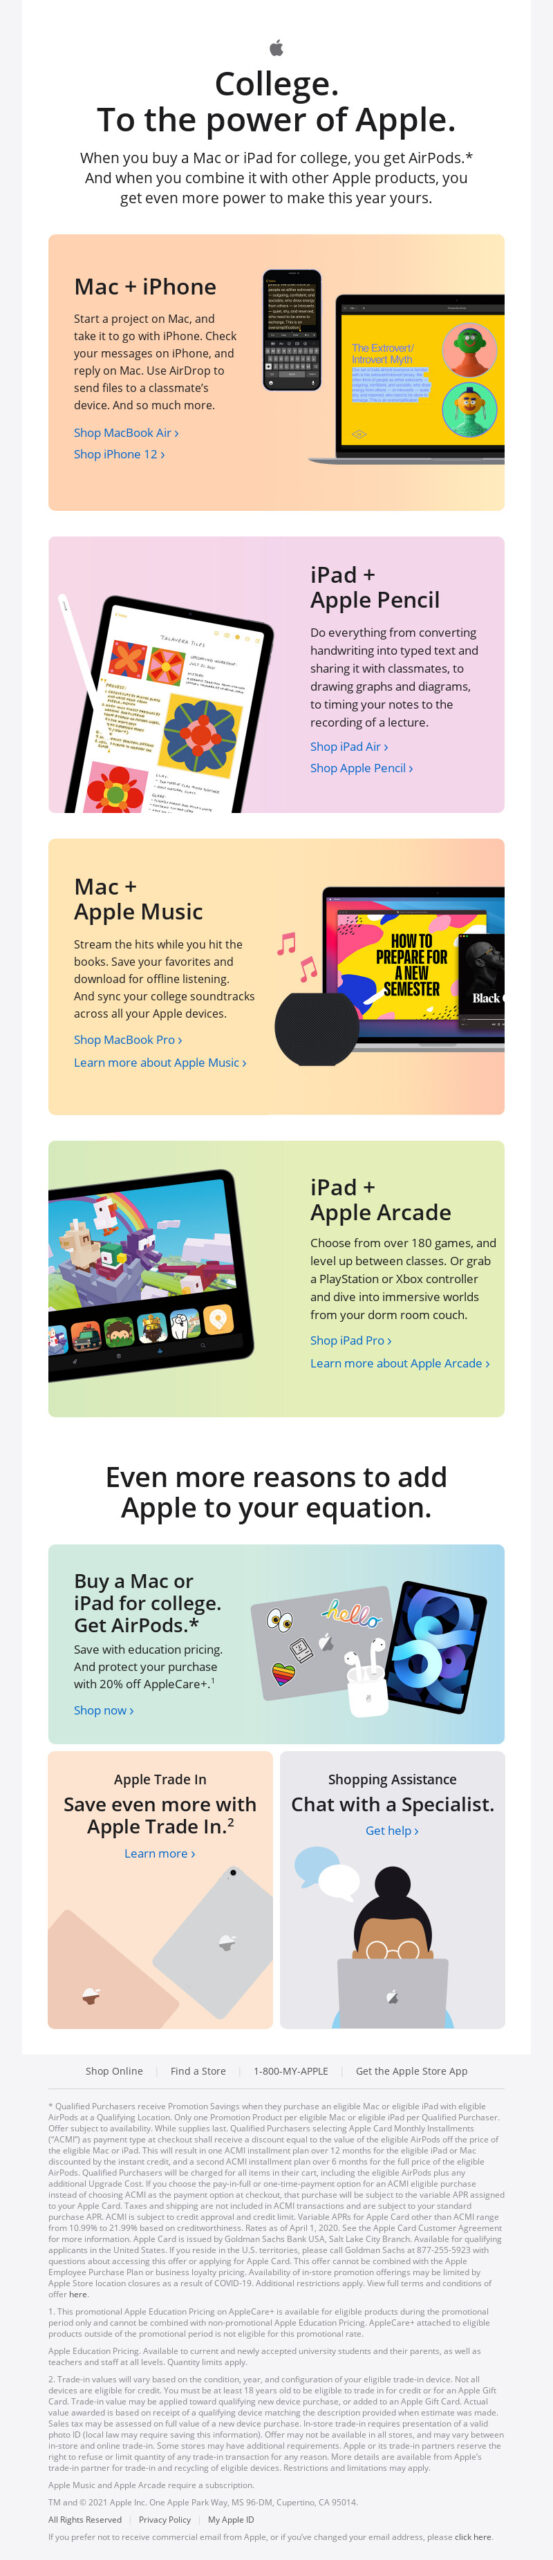 Apple back-to-school email marketing example